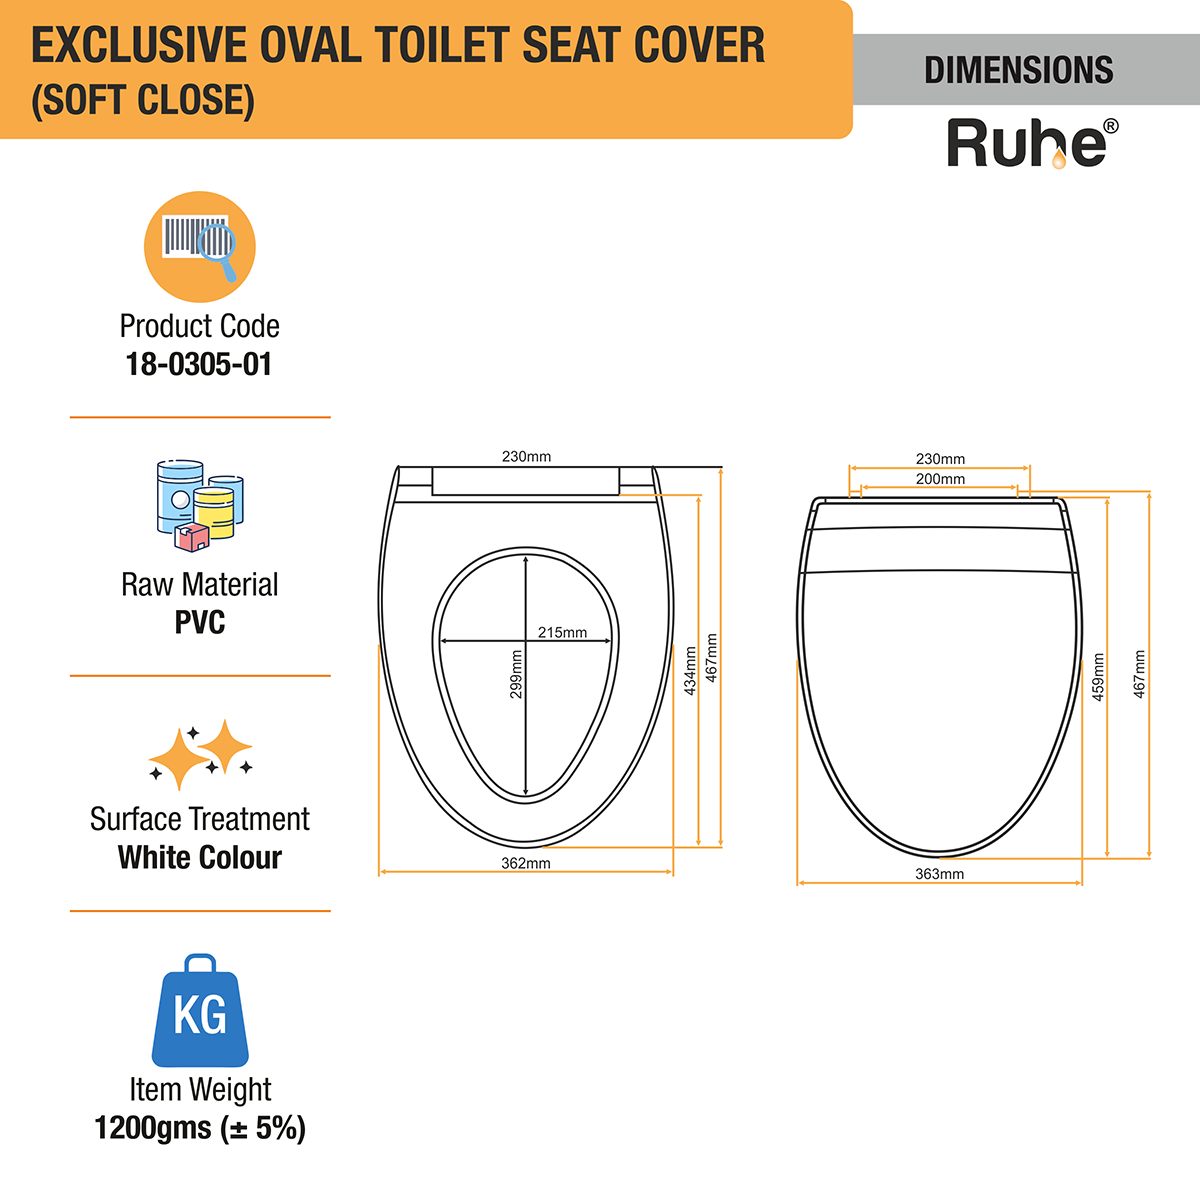 Exclusive Oval Toilet Seat Cover (Soft Close) dimensions and sizes